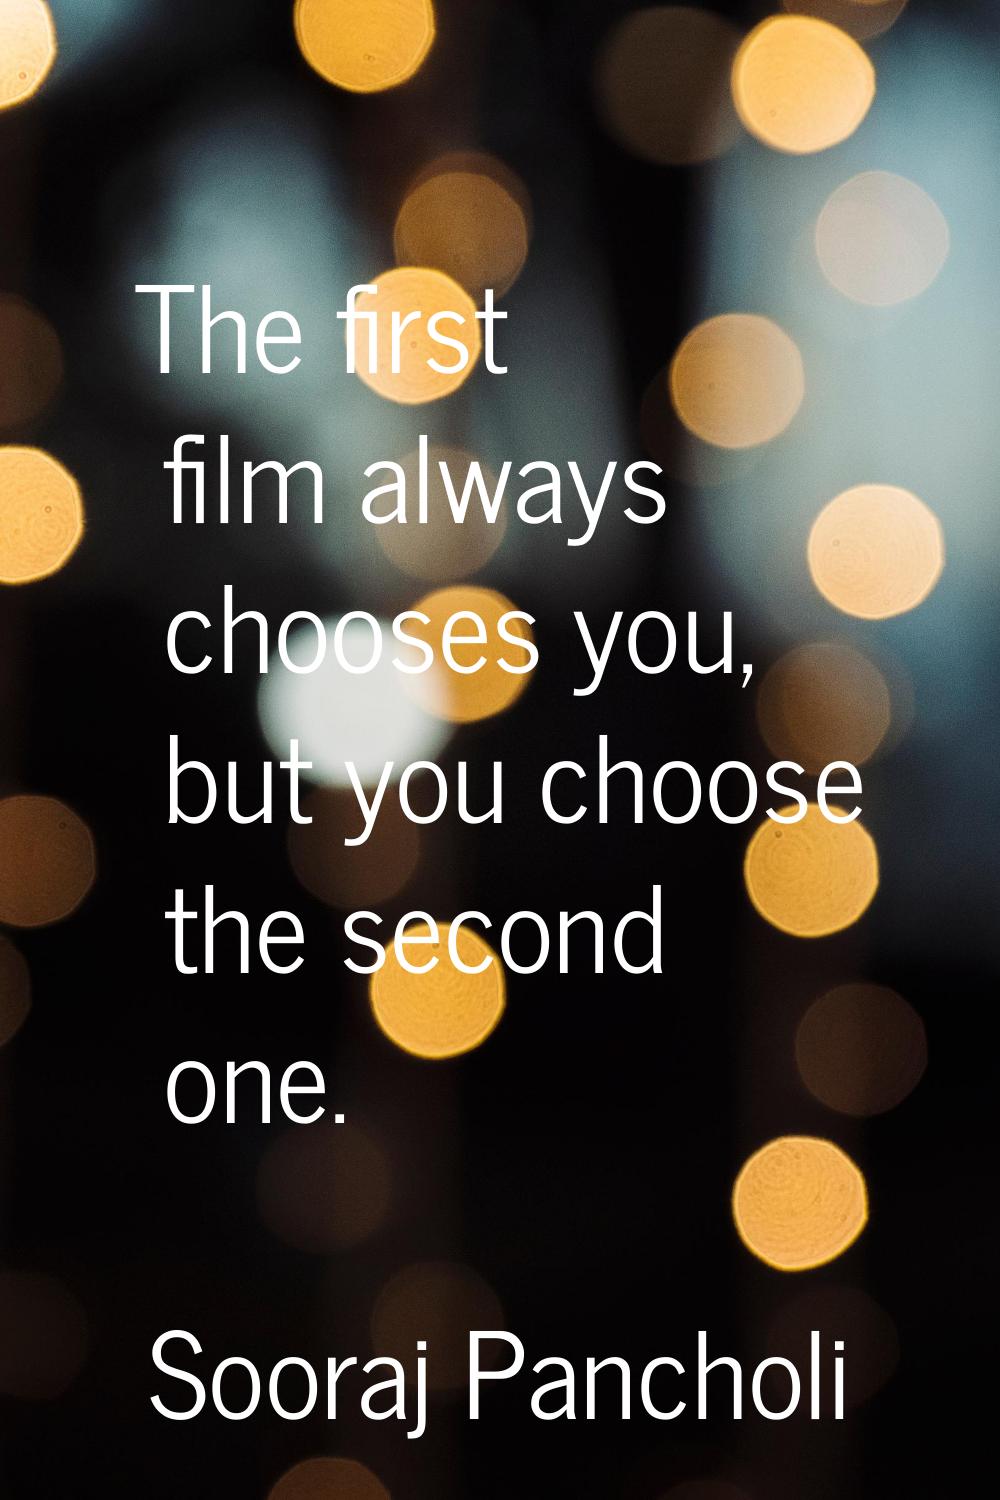 The first film always chooses you, but you choose the second one.